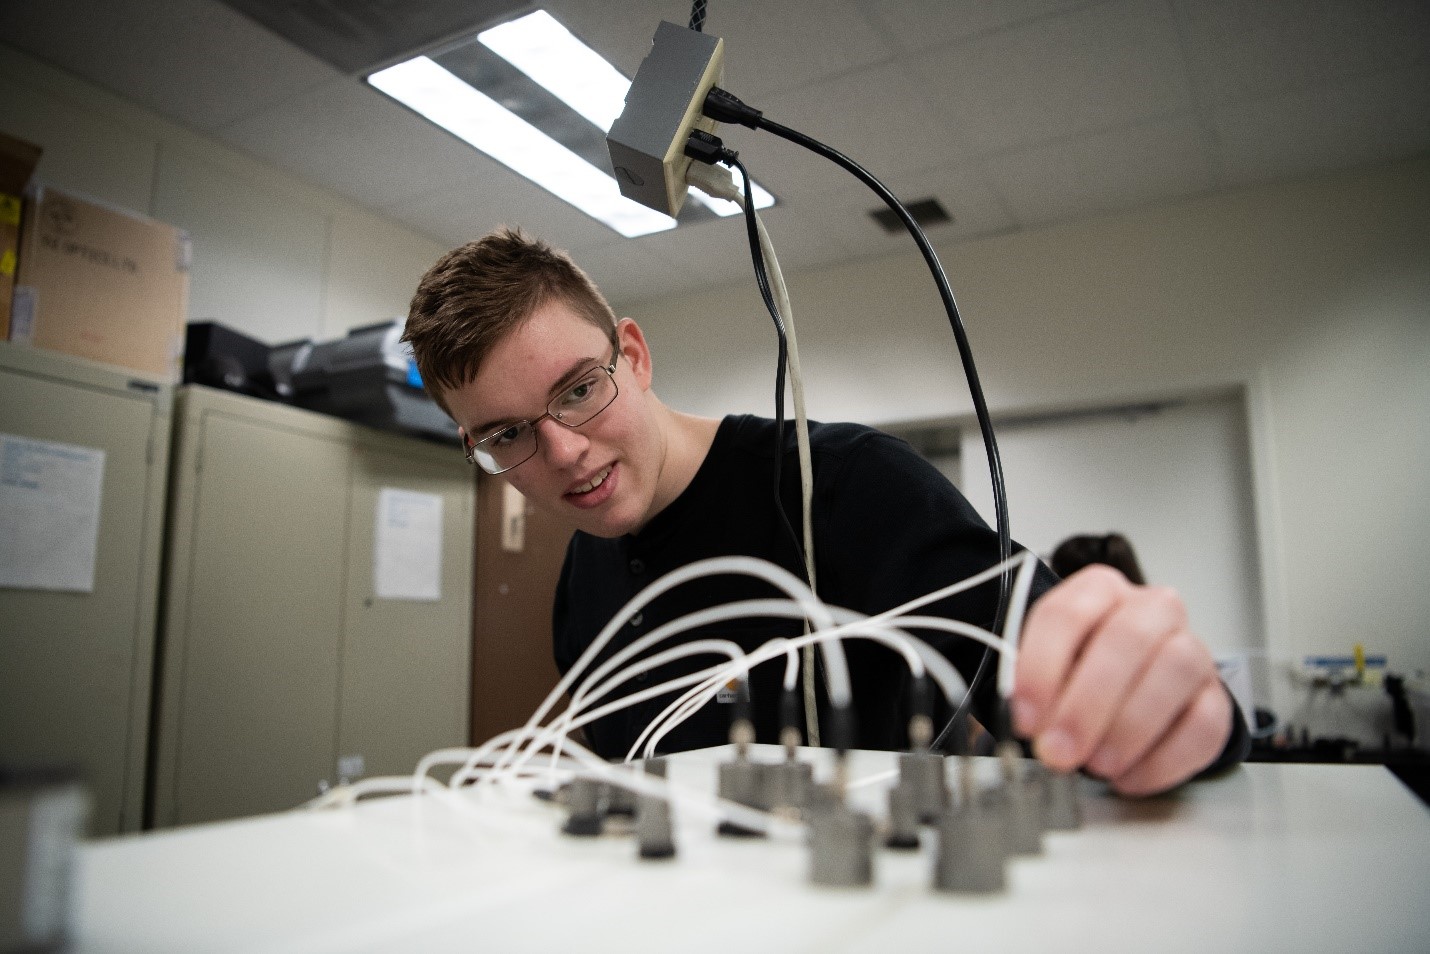 Andrew O'Brien adjusts transducers in a laboratory